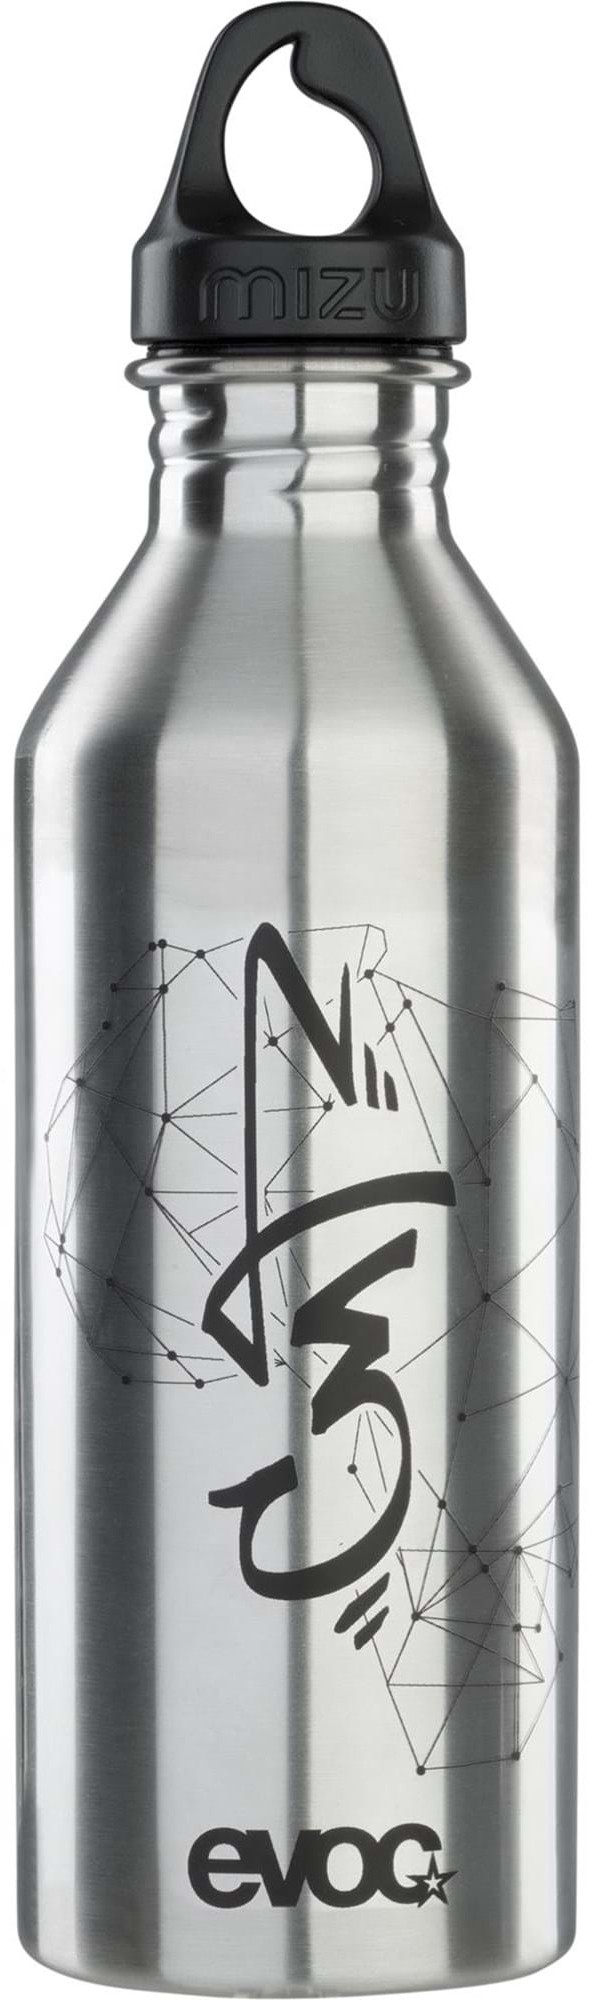 Stainless Steel Bottle 0.75L image 0